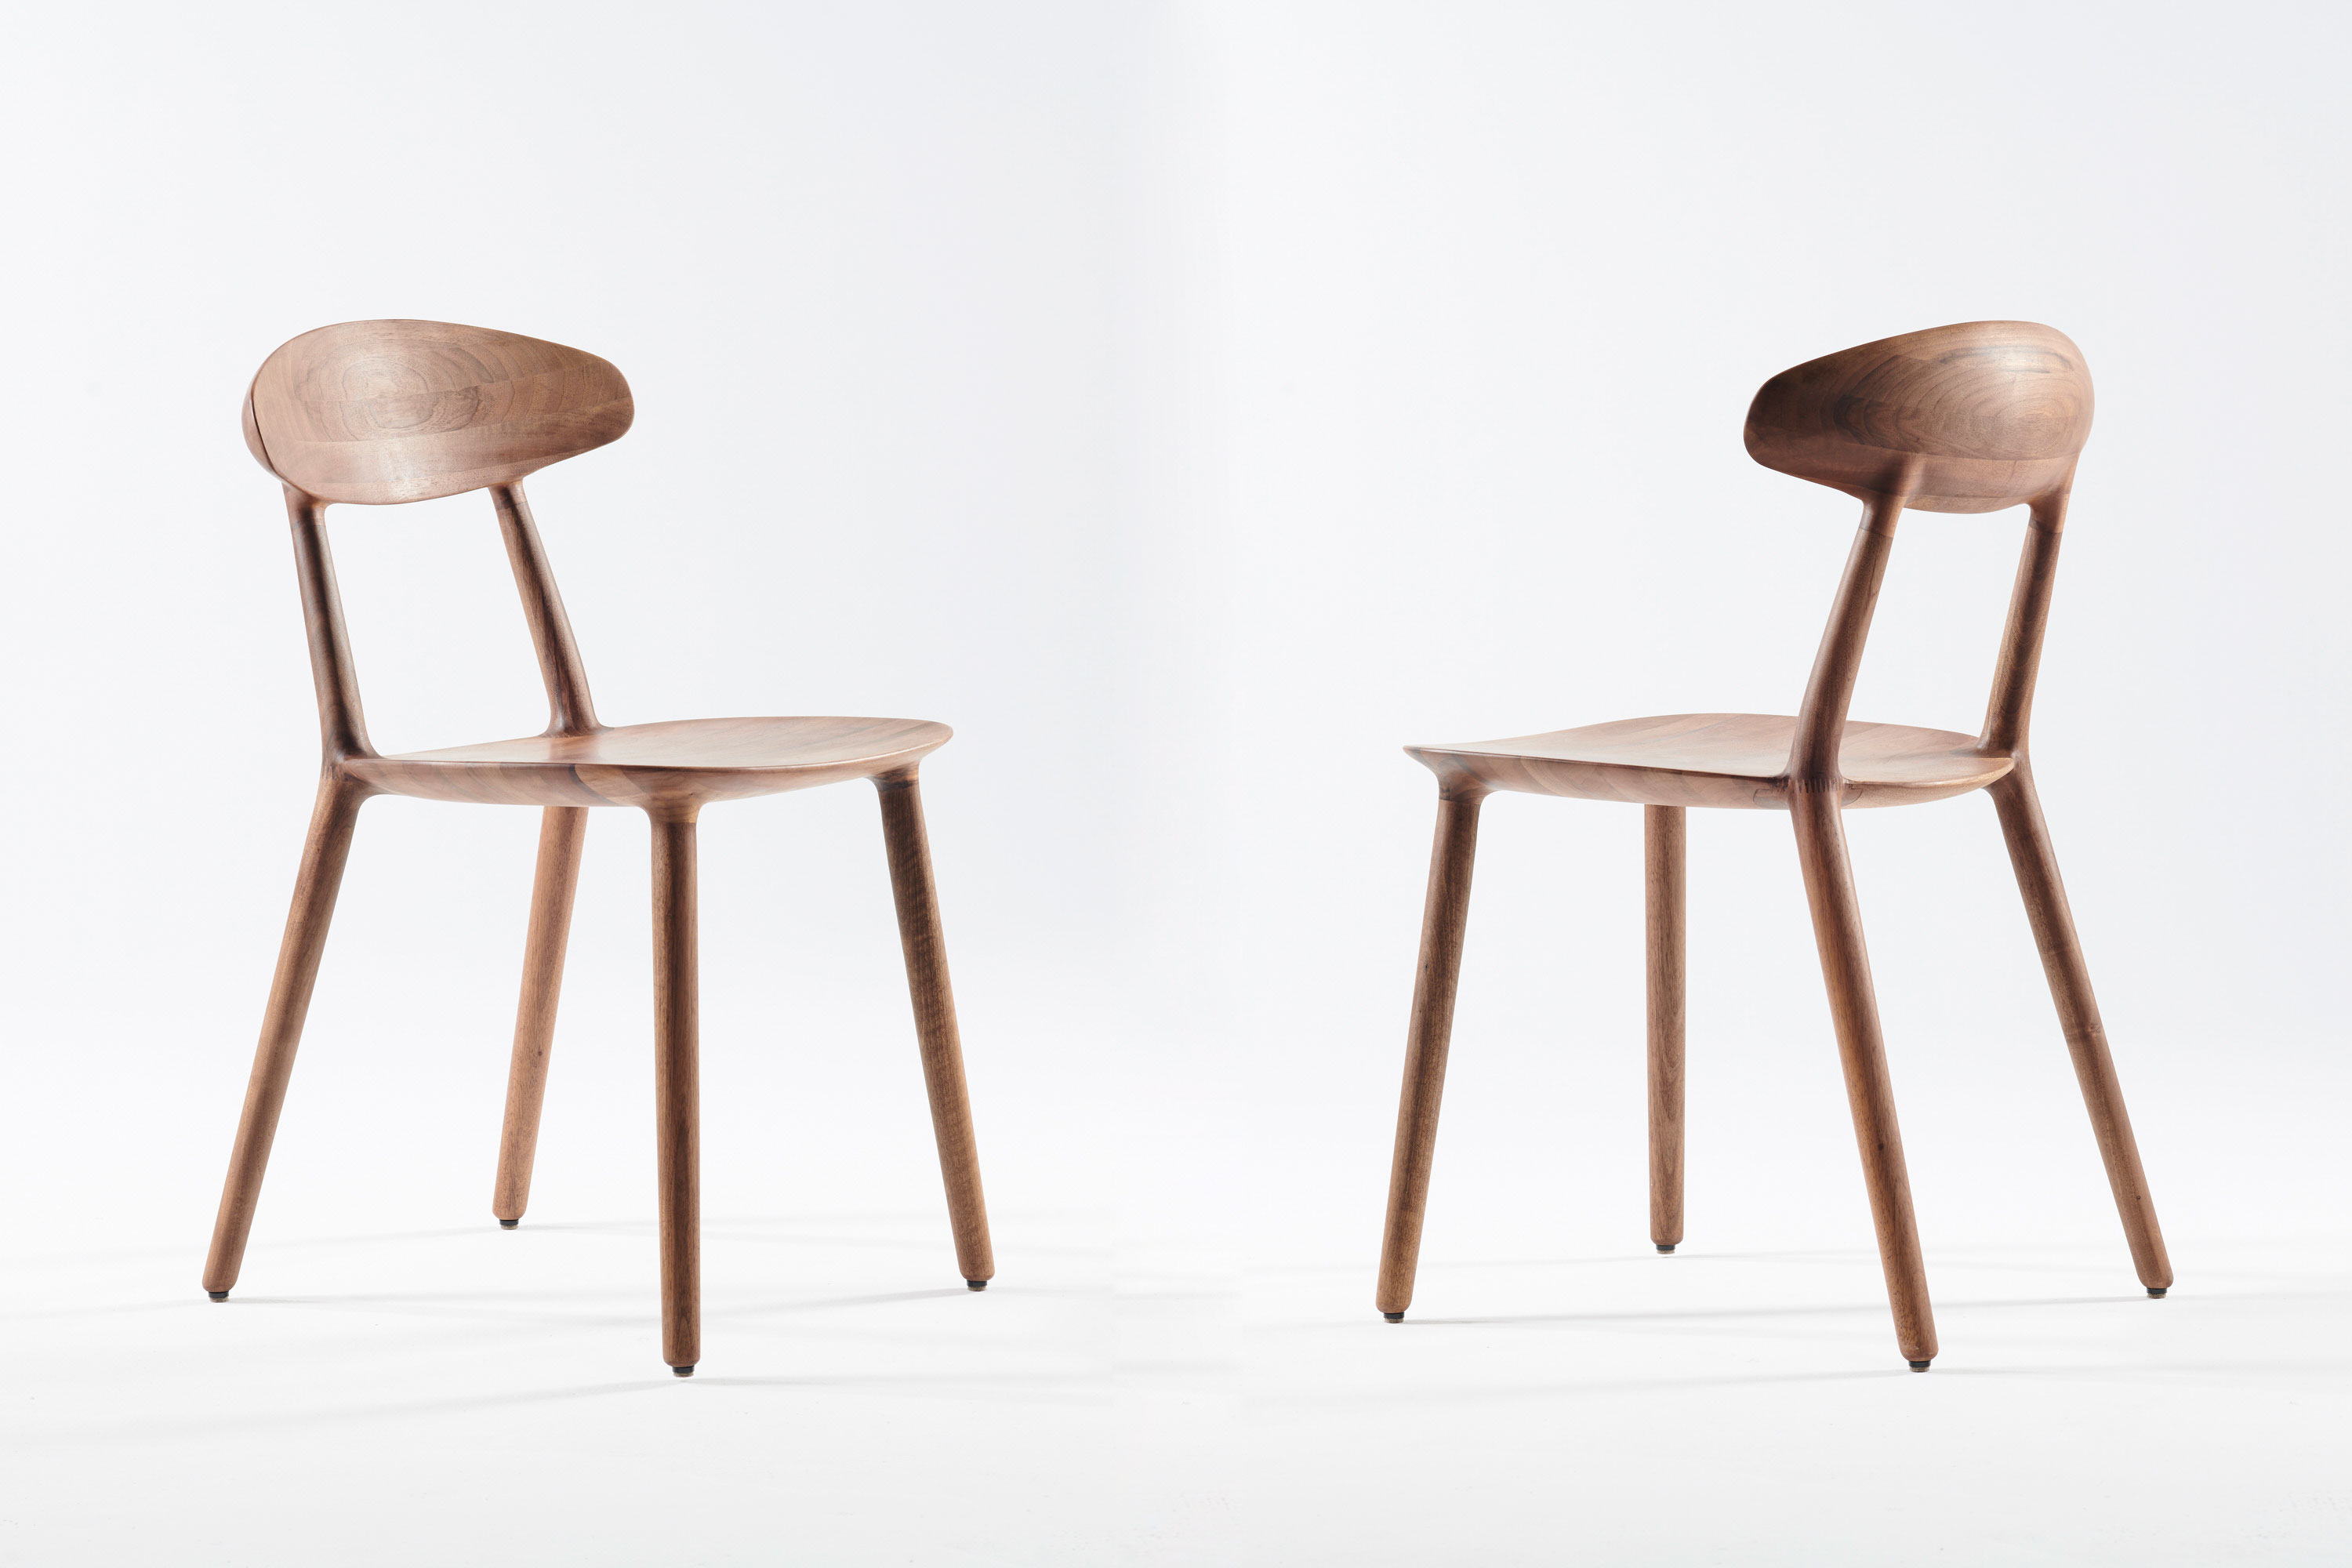  Wu furniture collection for Artisan